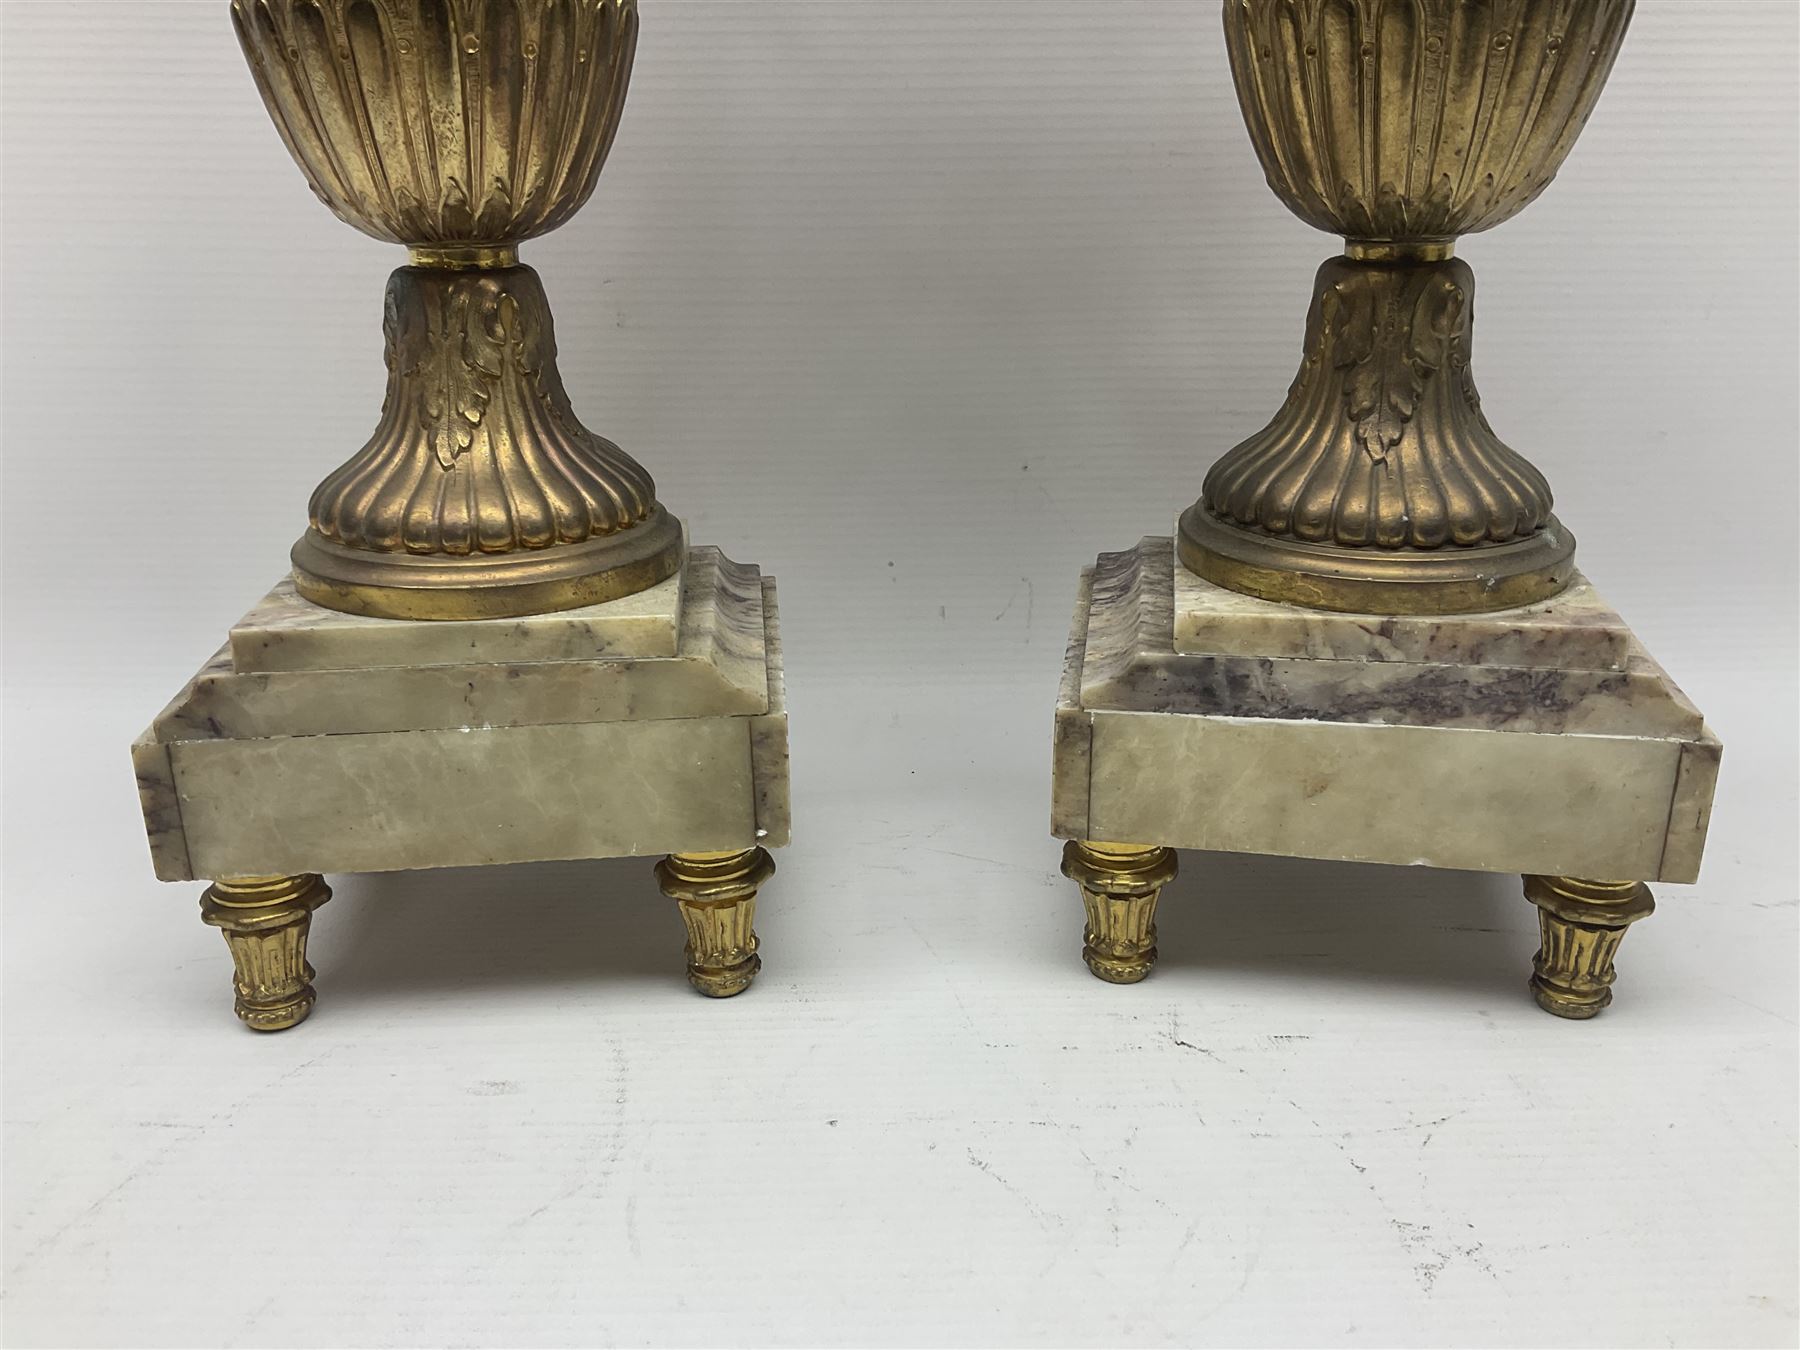 Pair of 19th century gilt metal twin handle urns - Image 25 of 27